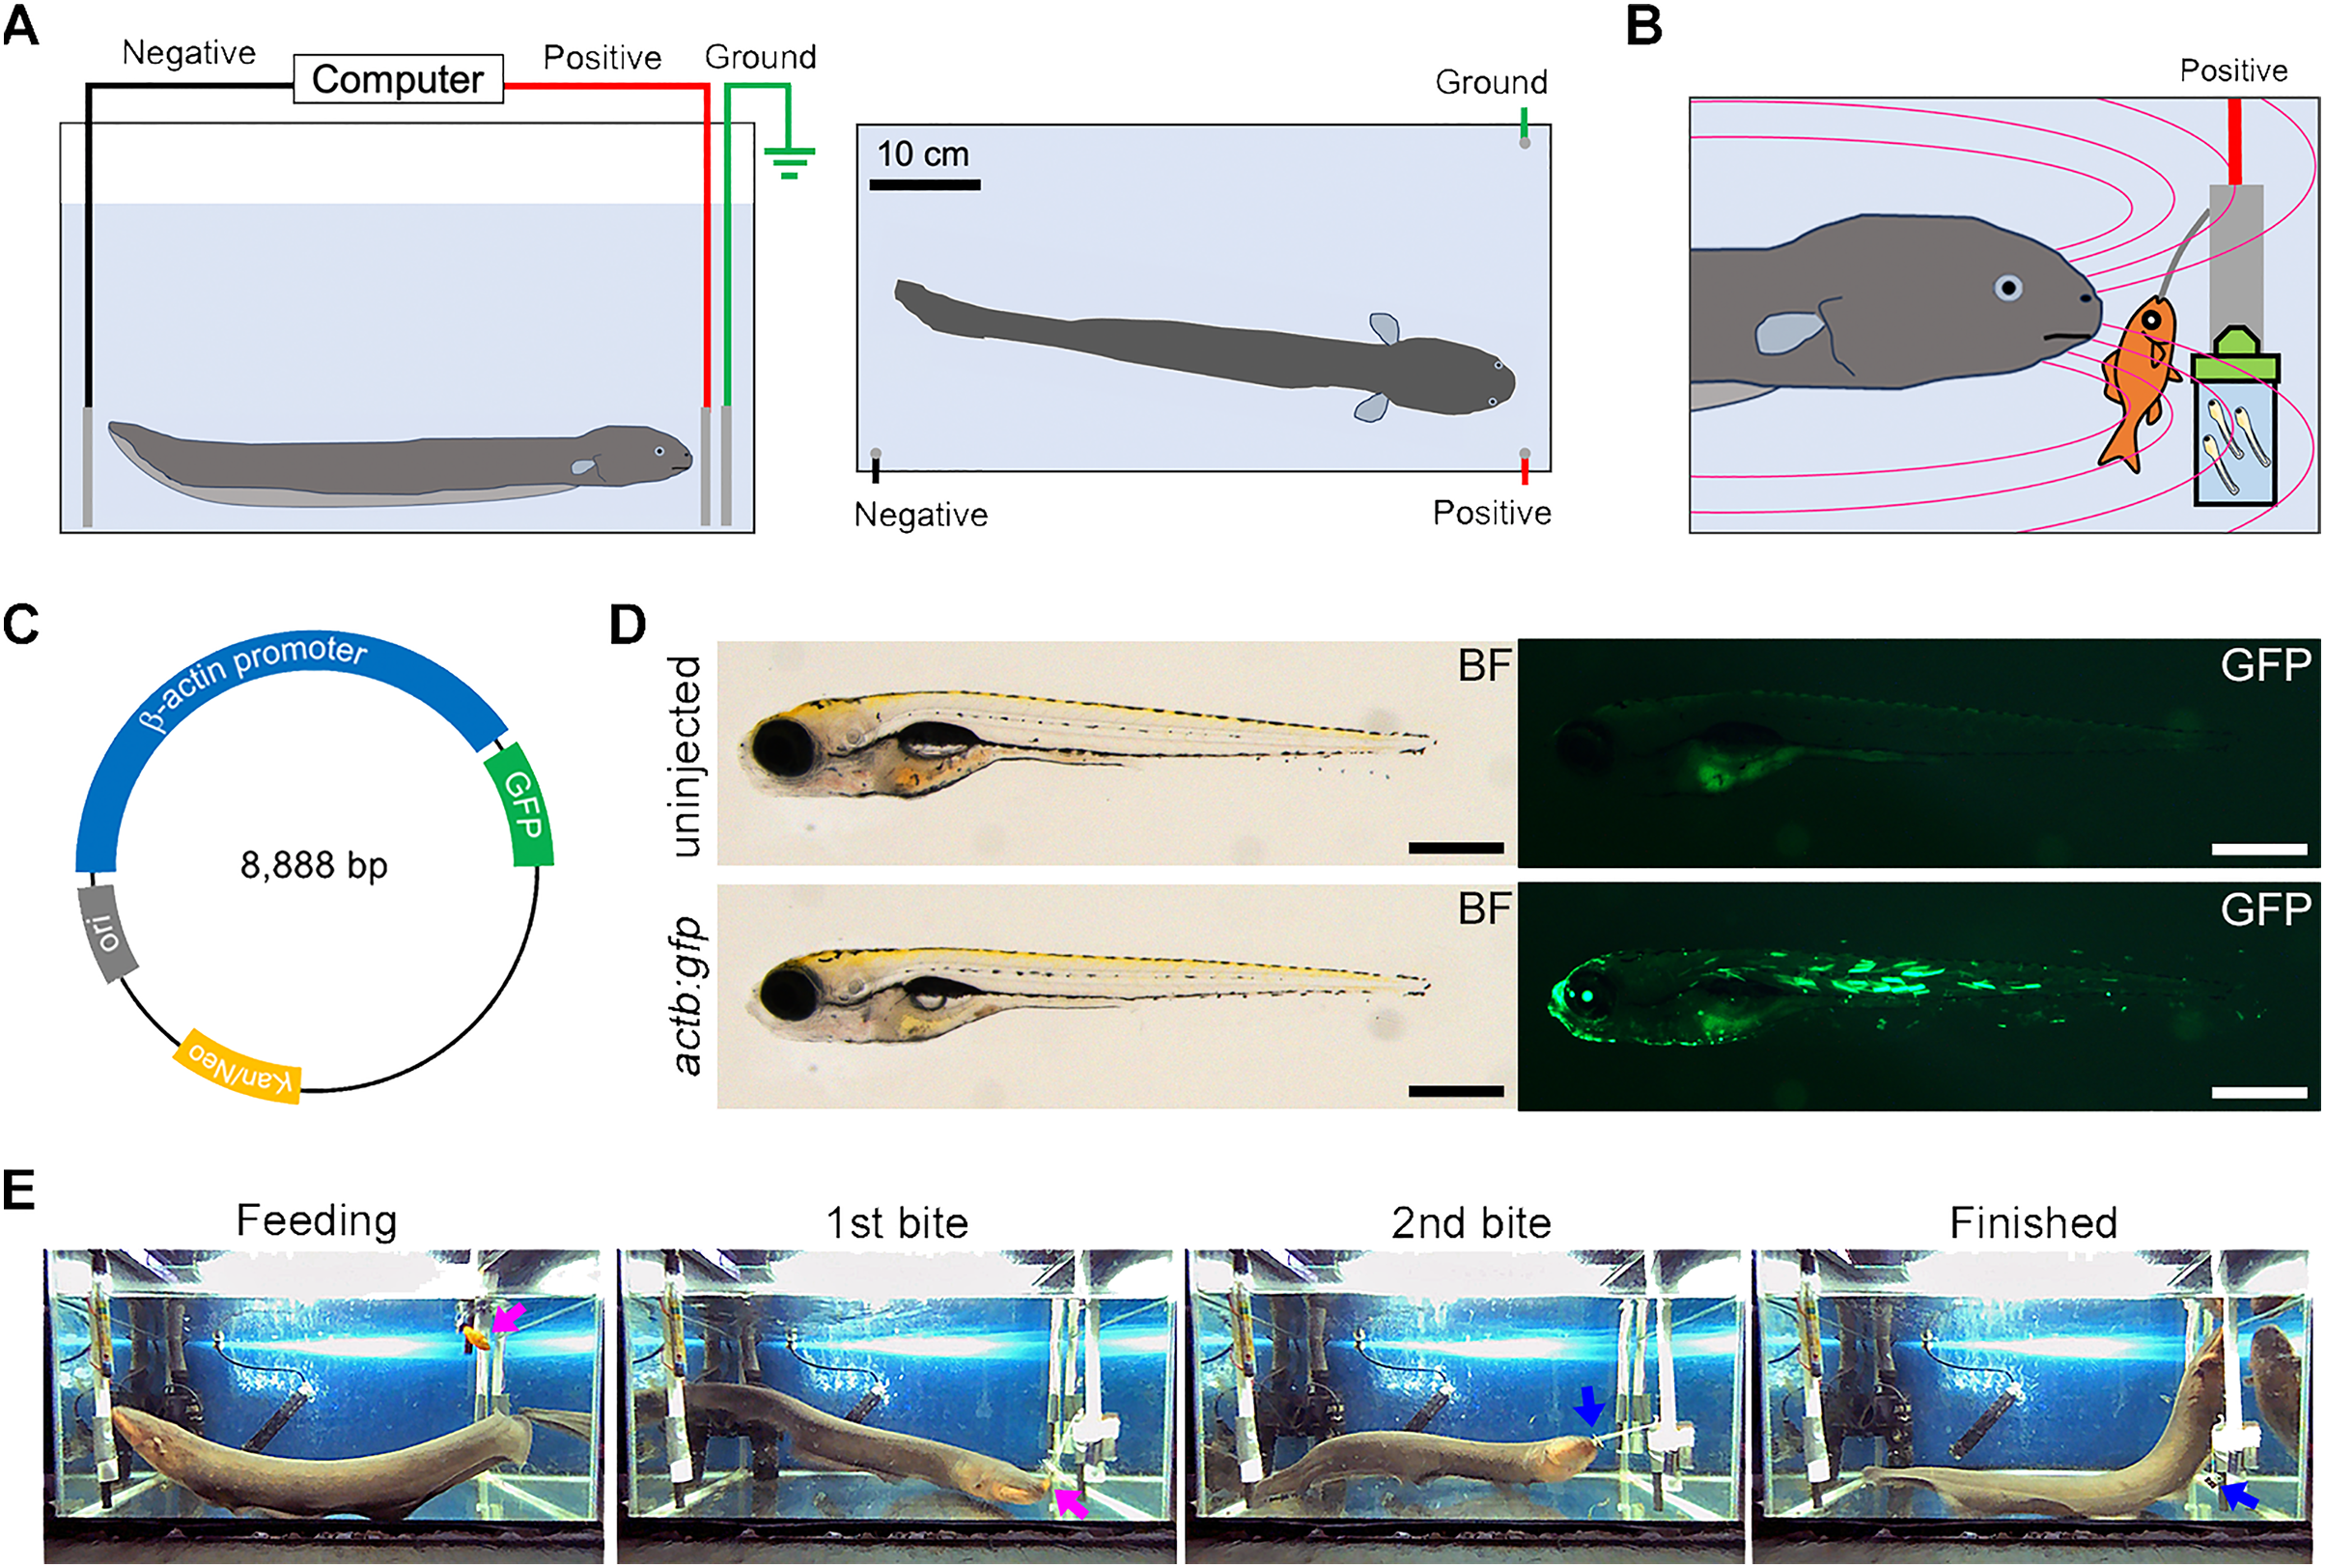 Electric organ discharge from electric eel facilitates DNA